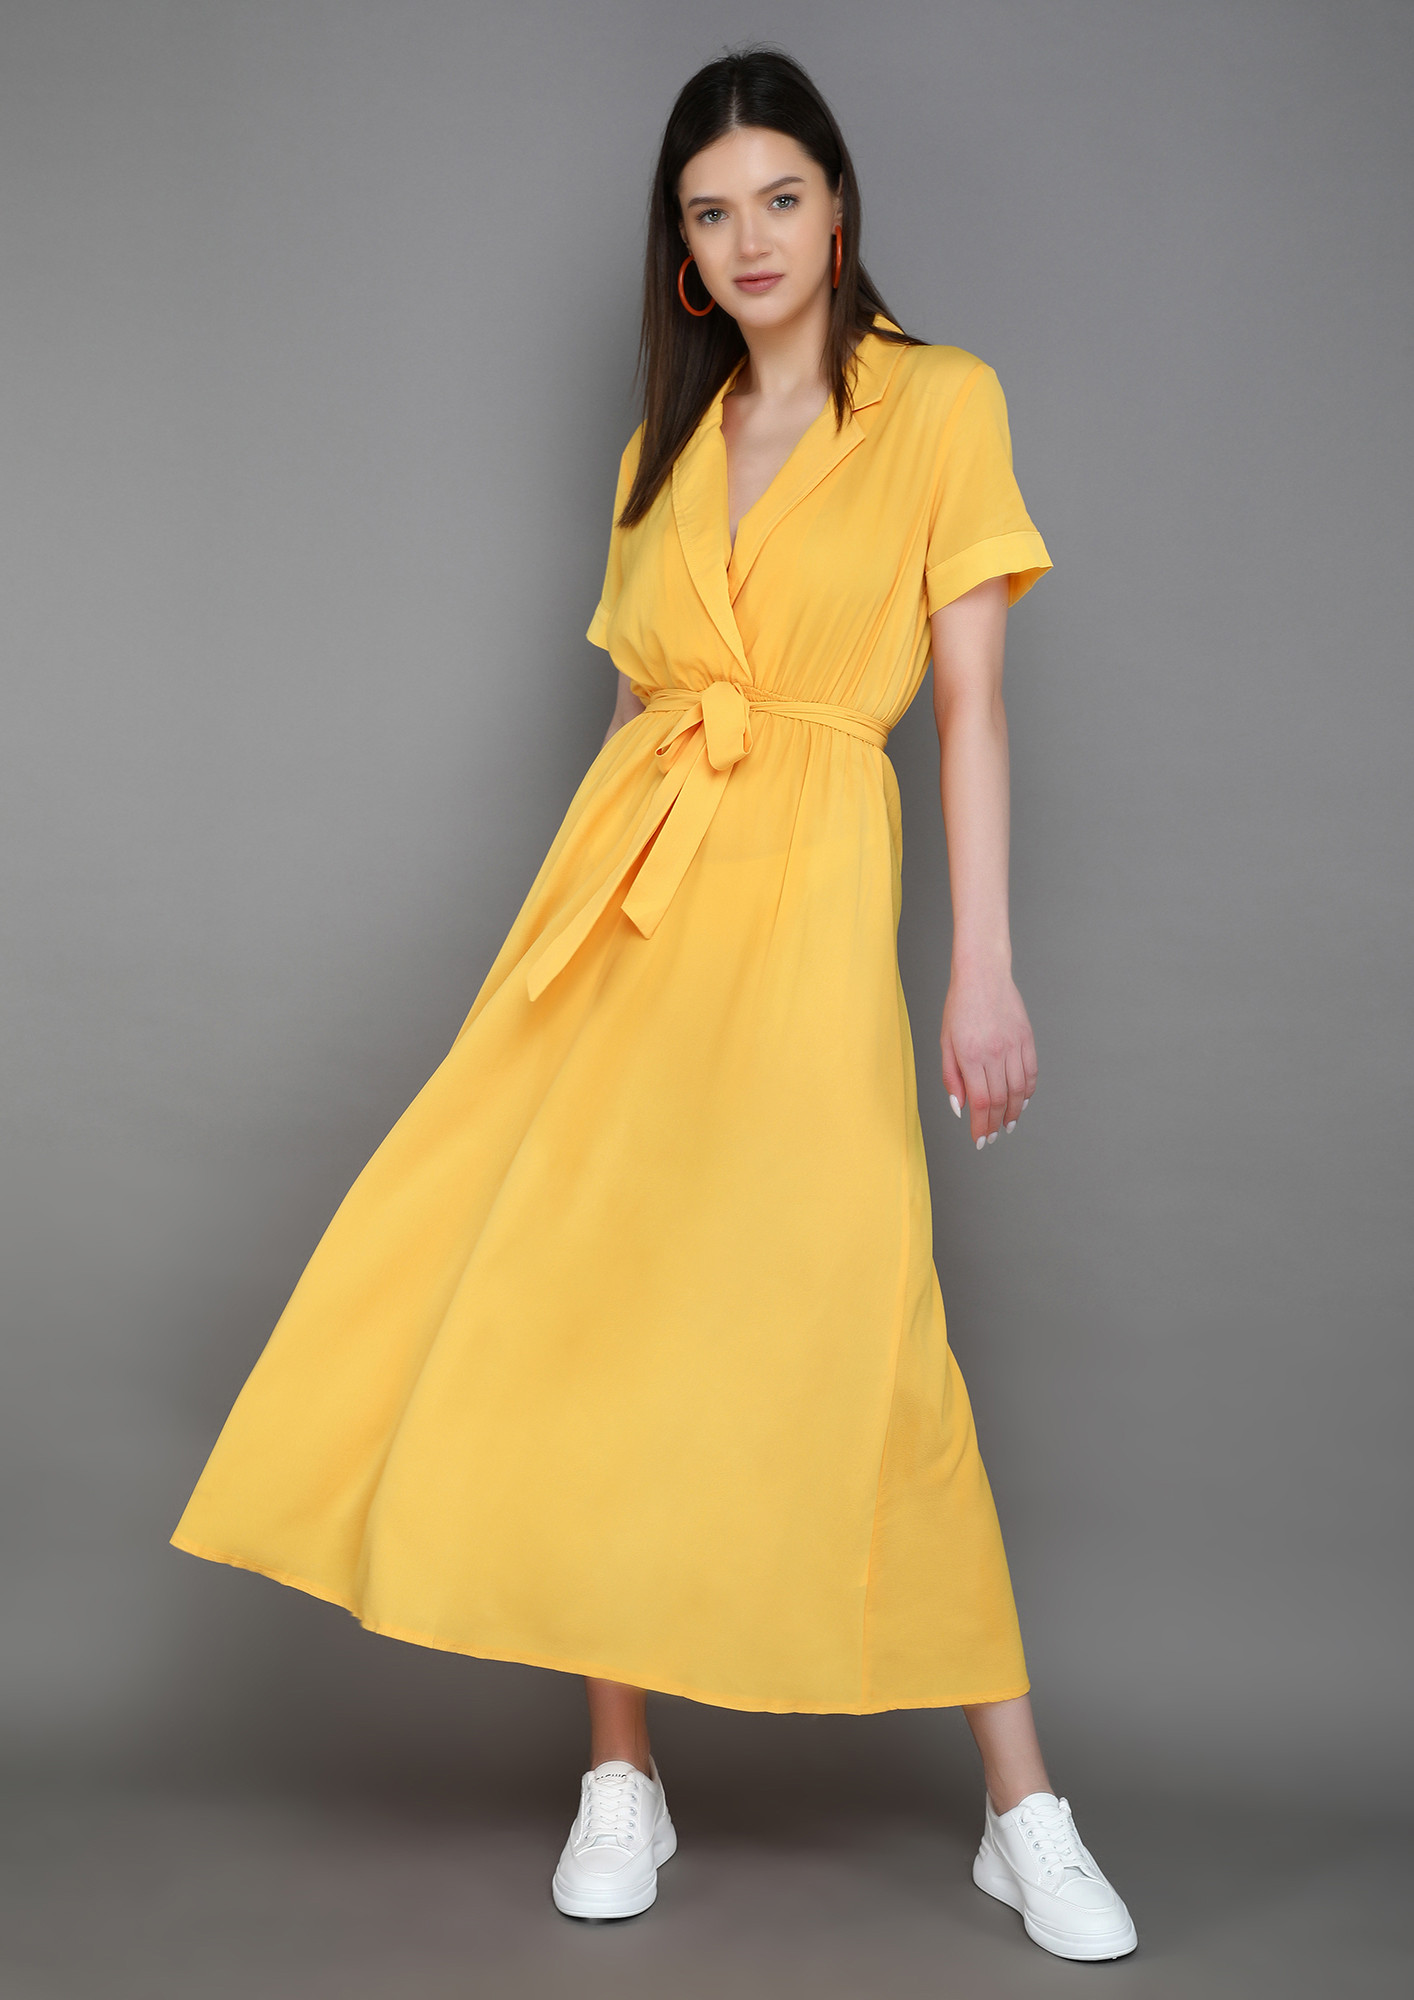 GOING WITH FLOW YELLOW DRESS